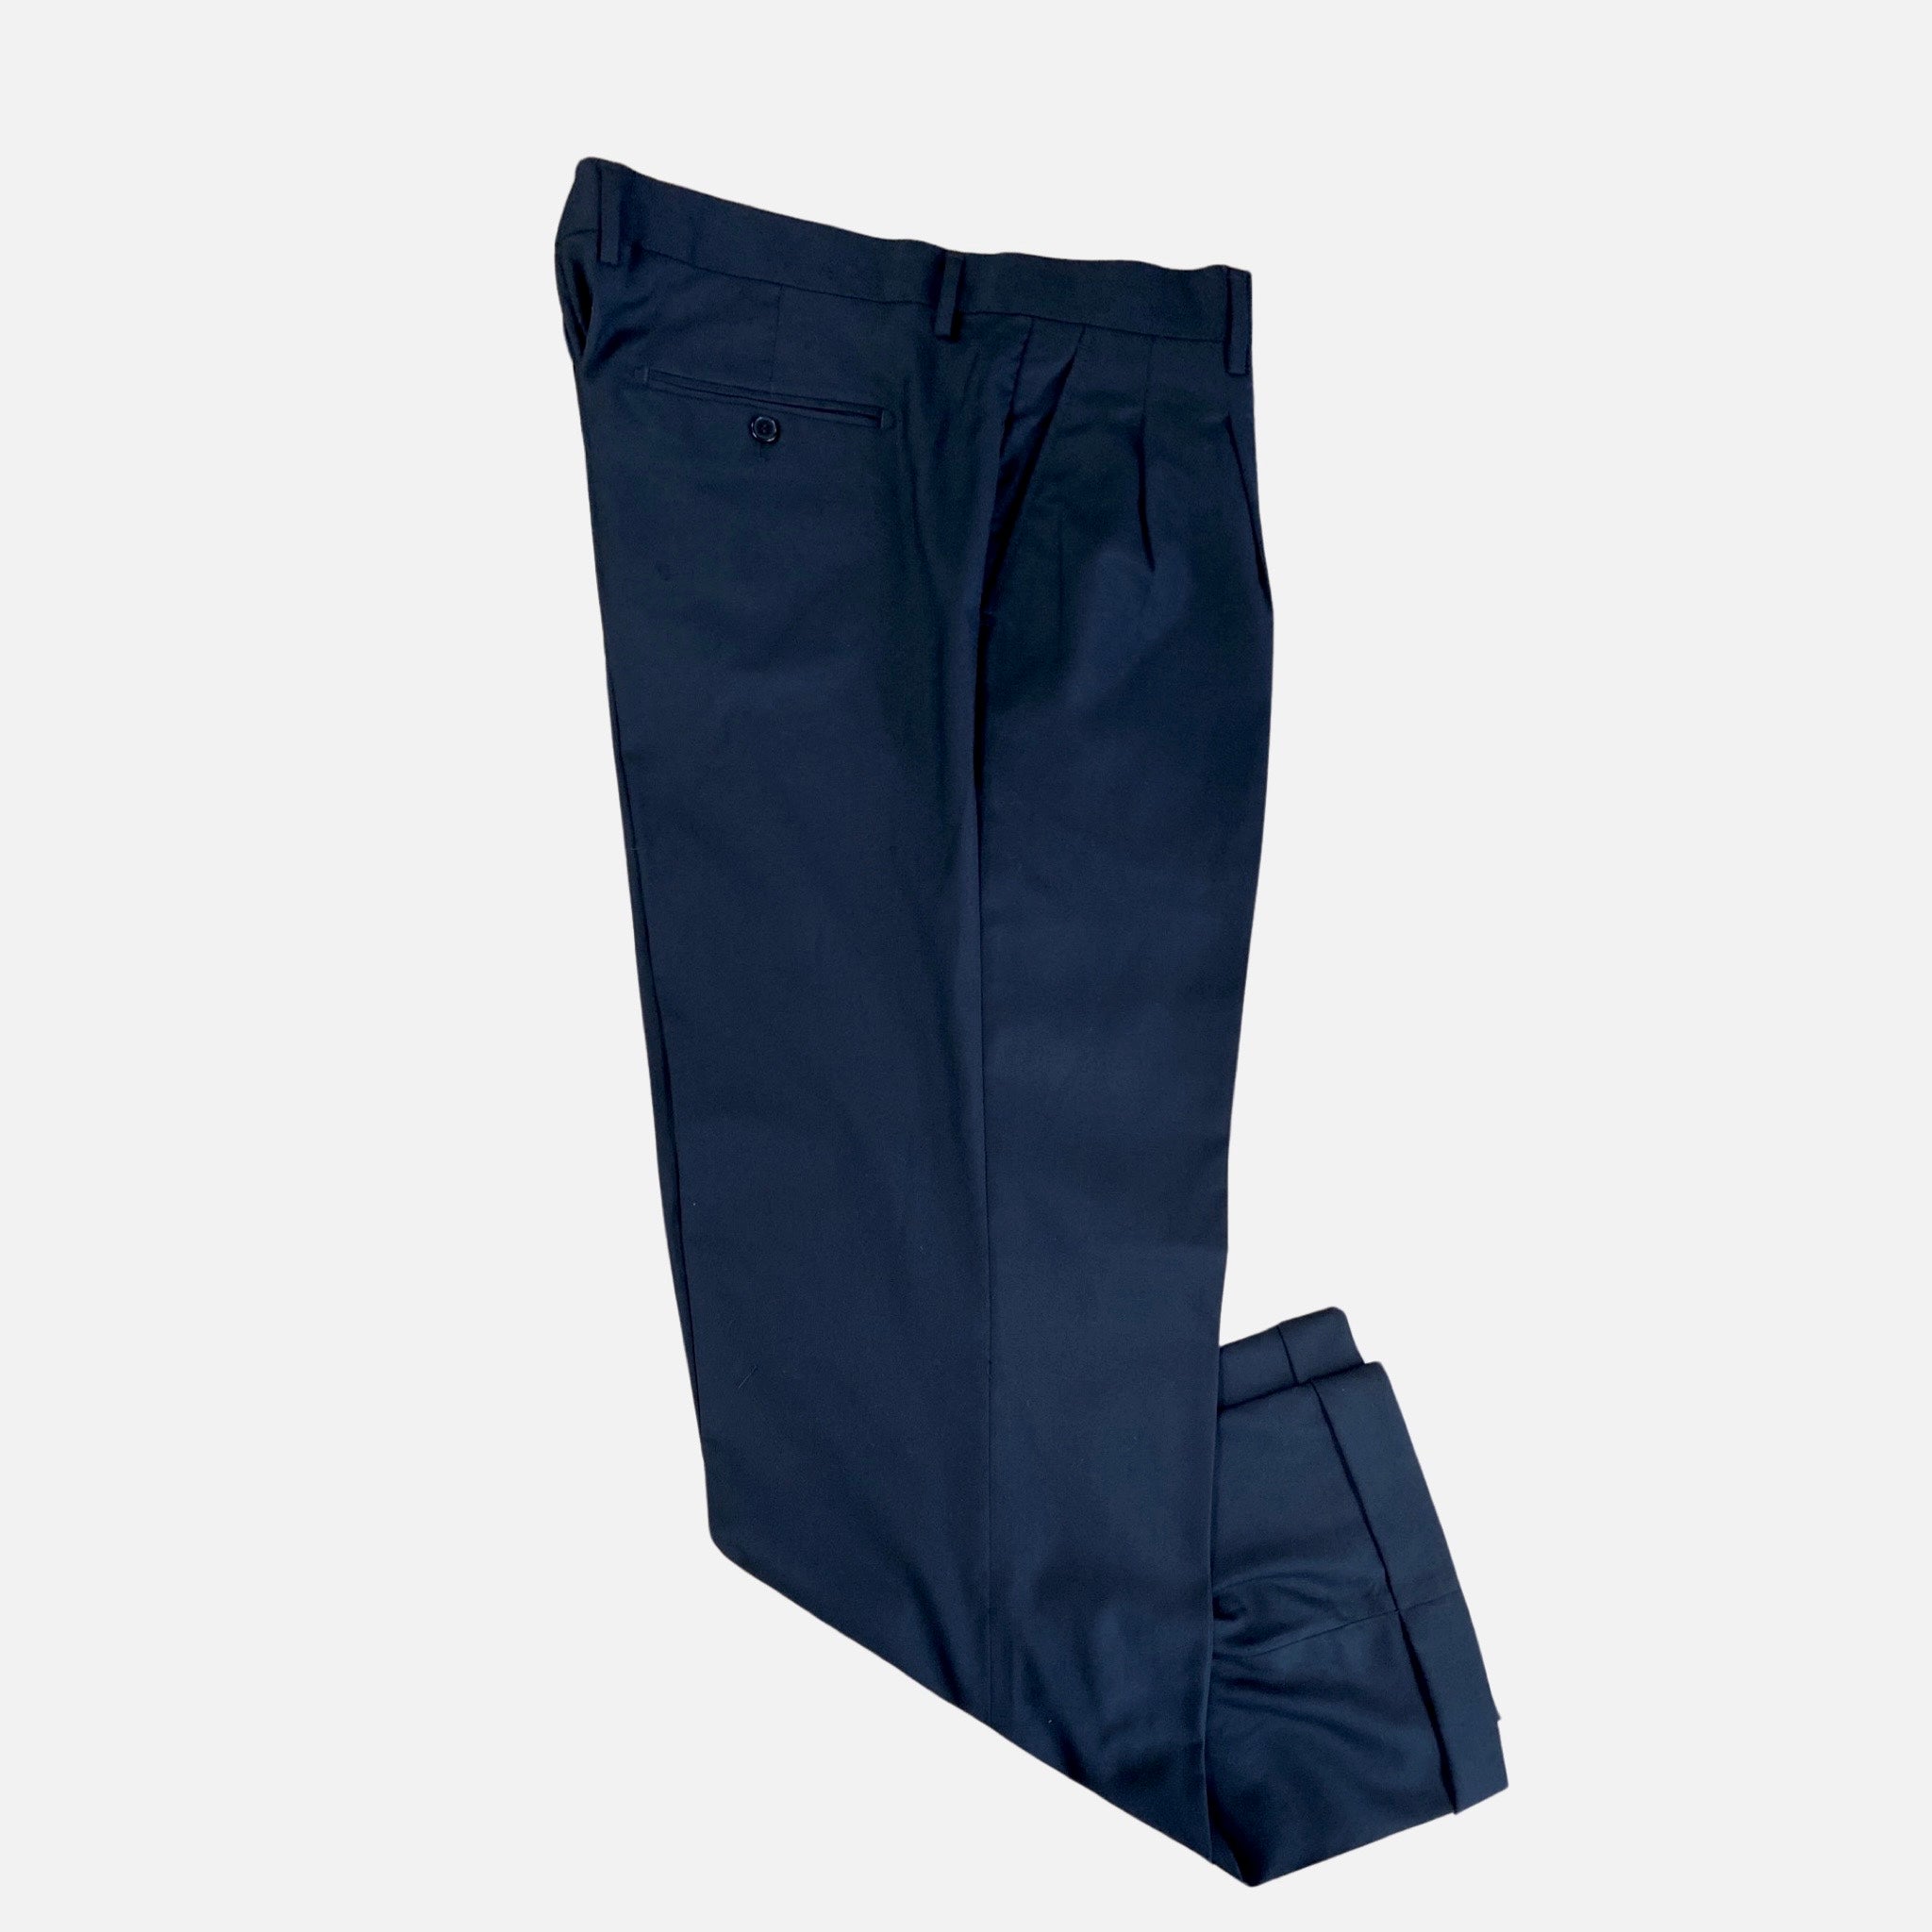 Clearance Sale: Inserch Men's Two-Pleat Pants - Black - Now Only $49.99!